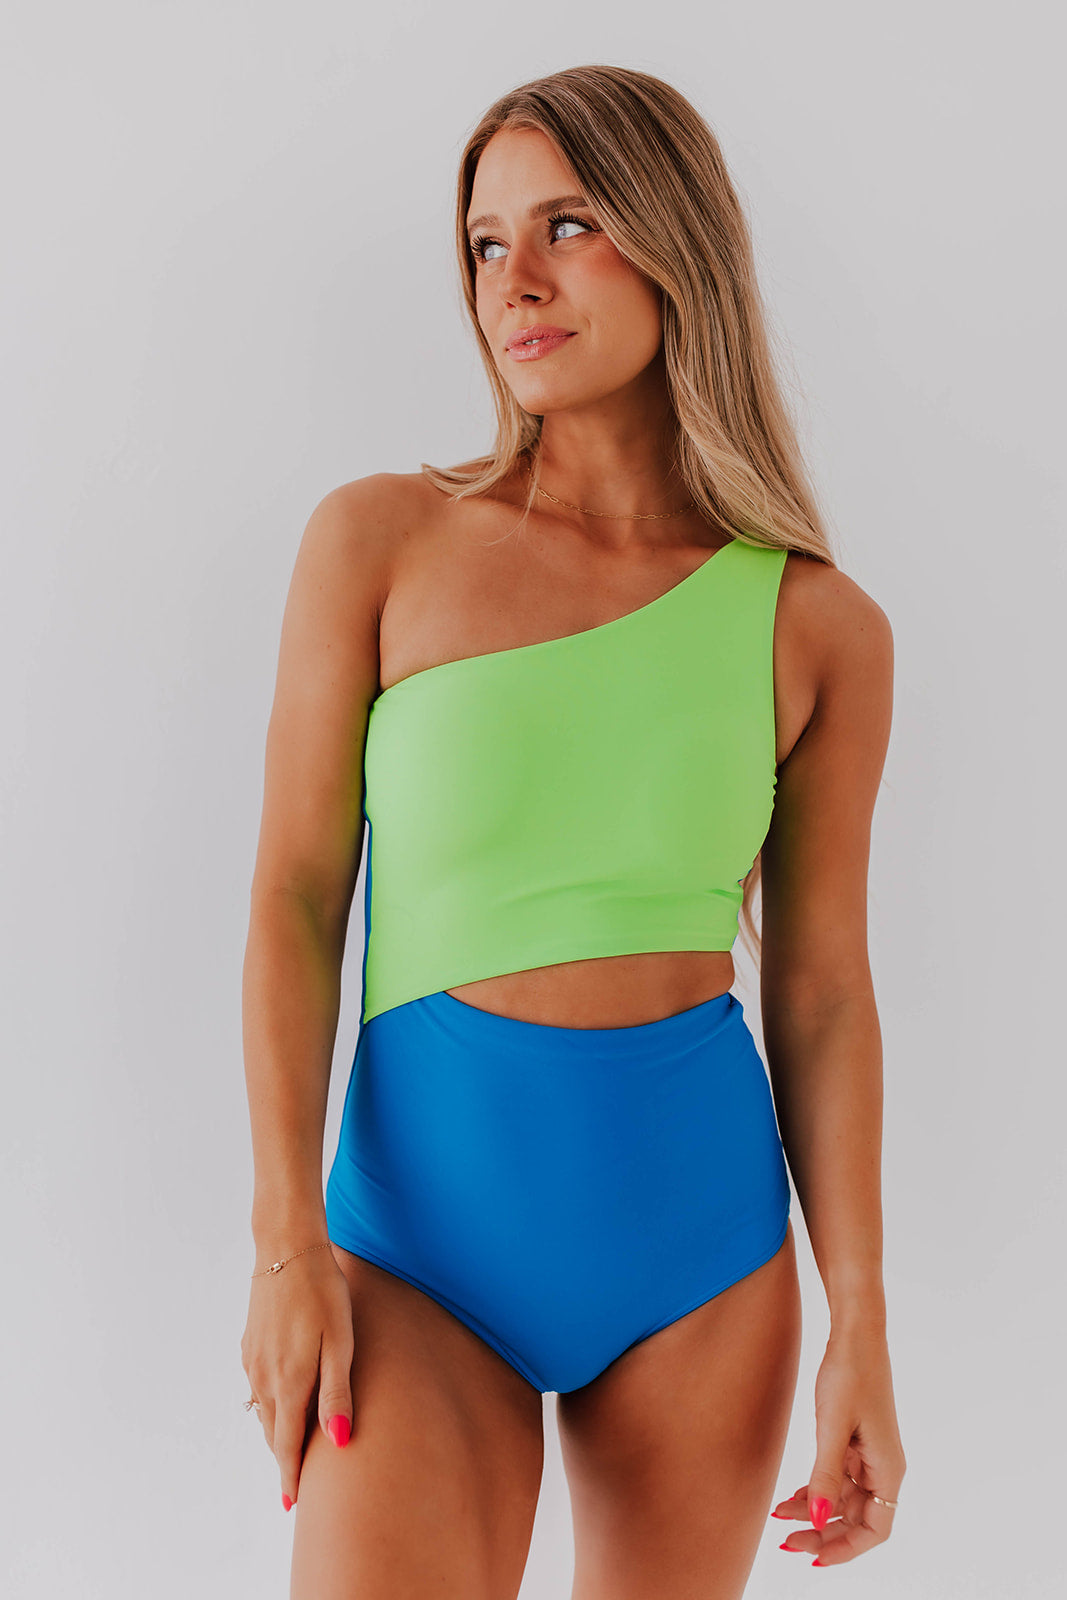 Blue one-piece swimsuit with tight push-up bust and low-cut bikini